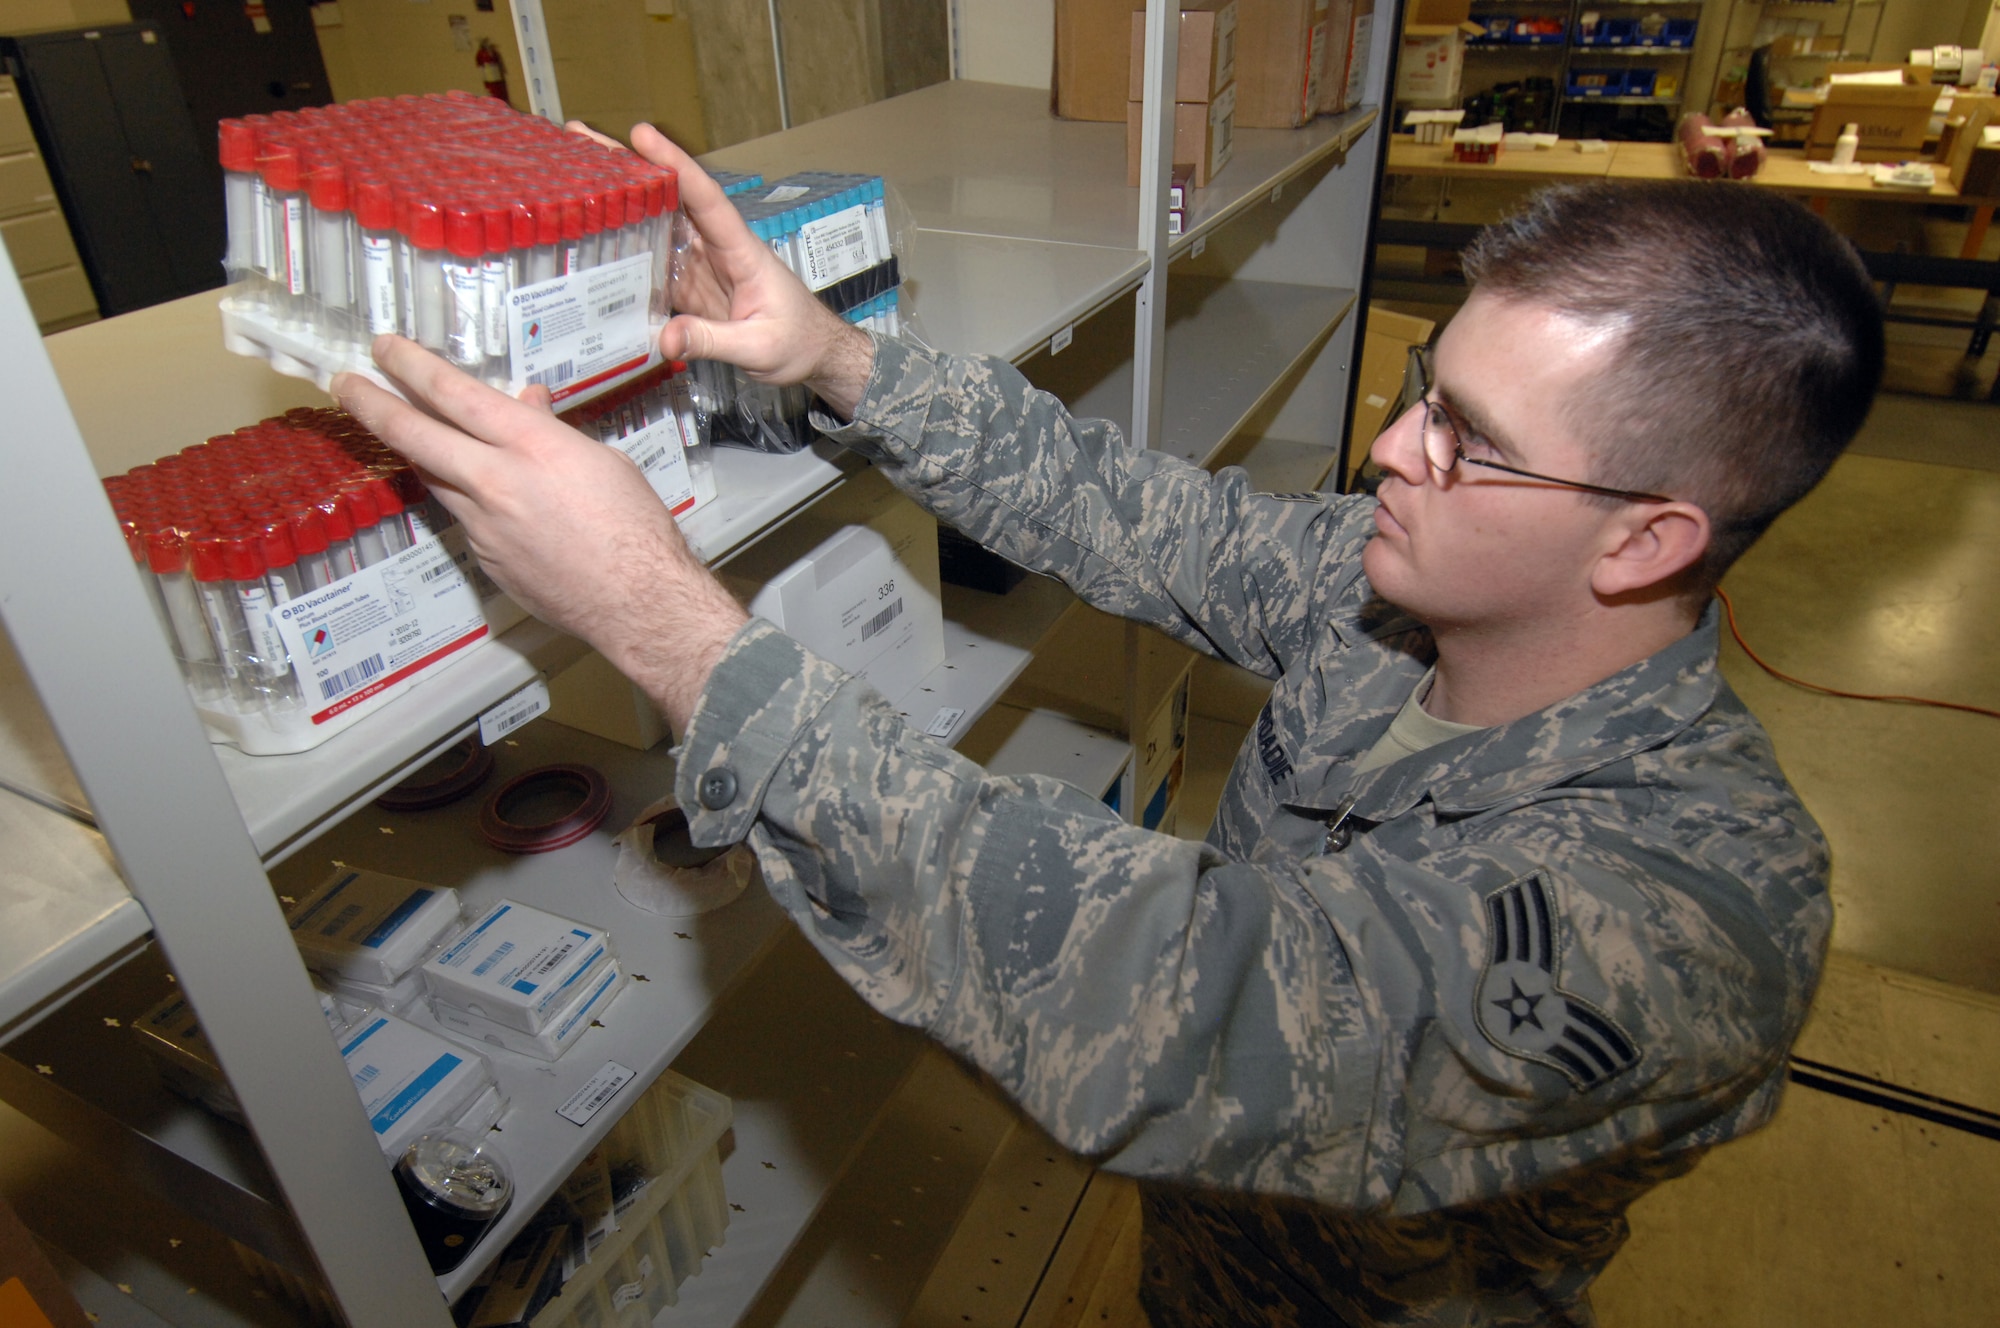 MINOT AIR FORCE BASE, N.D. -- Senior Airman Christopher Broadie, 5th Medical Group medical logistics materiel journeyman, stocks blood collection tubes onto the warehouse shelving of the storage distribution here Nov. 6. Medical Logistics receives miscellaneous medical supplies, including those involving dental, physical therapy and laboratory work.  Airman Broadie was recognized as an outstanding performer during the 5th MDG’s recent Air Force Inspection Agency Health Services Inspection. The medical group was rated an outstanding in eight of the 16 major graded areas and captured an overall excellent rating for the HSI. (U.S. Air Force photo by Airman 1st Class Jesse Lopez)